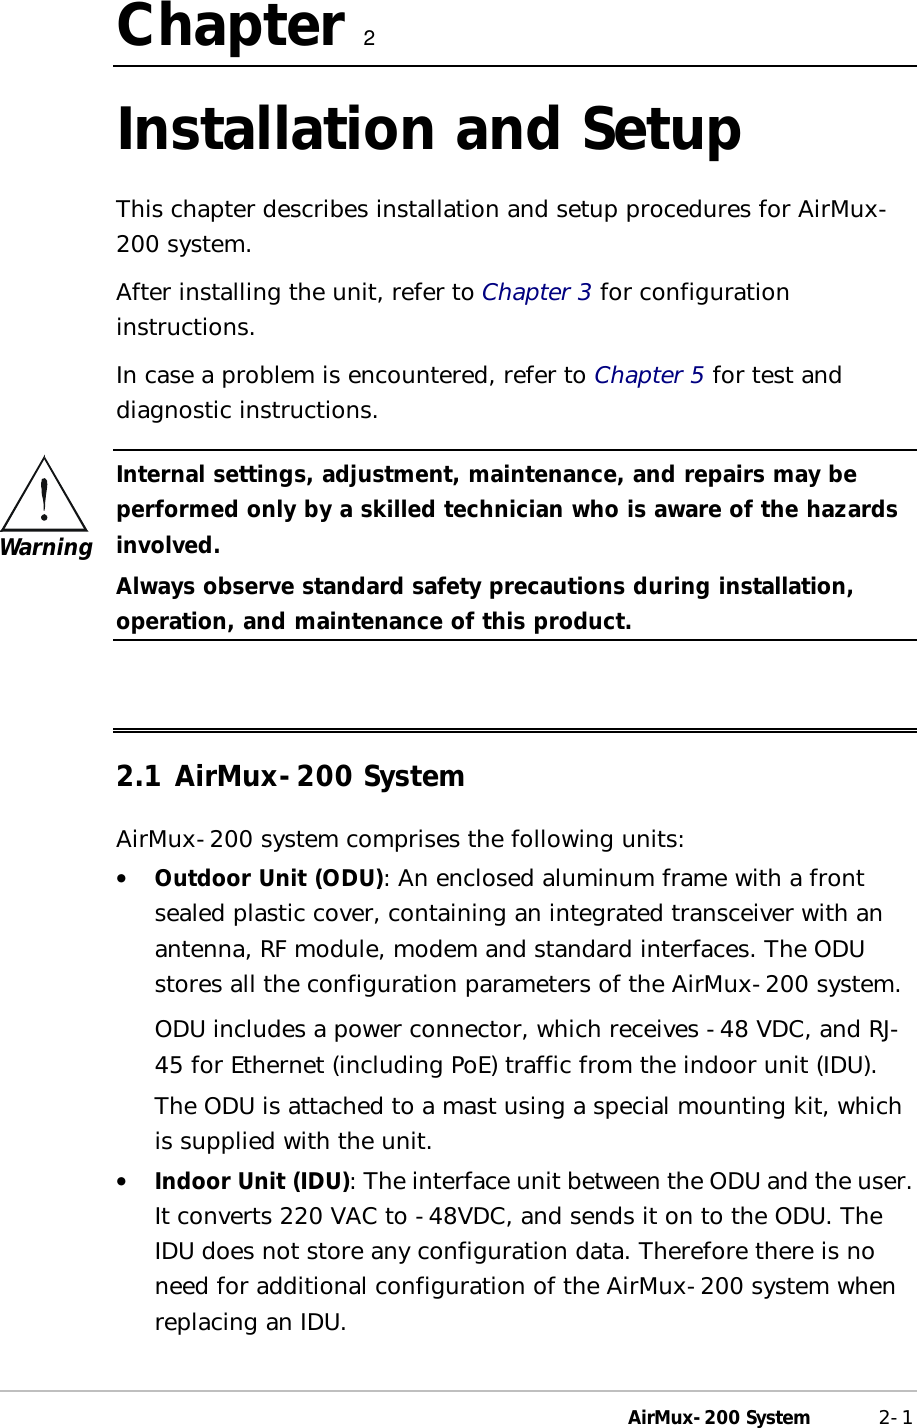  AirMux-200 System 2-1 Chapter   2 Installation and Setup This chapter describes installation and setup procedures for AirMux-200 system. After installing the unit, refer to Chapter 3 for configuration instructions. In case a problem is encountered, refer to Chapter 5 for test and diagnostic instructions.  Internal settings, adjustment, maintenance, and repairs may be performed only by a skilled technician who is aware of the hazards involved. Always observe standard safety precautions during installation, operation, and maintenance of this product.  2.1 AirMux-200 System AirMux-200 system comprises the following units: •  Outdoor Unit (ODU): An enclosed aluminum frame with a front sealed plastic cover, containing an integrated transceiver with an antenna, RF module, modem and standard interfaces. The ODU stores all the configuration parameters of the AirMux-200 system. ODU includes a power connector, which receives -48 VDC, and RJ-45 for Ethernet (including PoE) traffic from the indoor unit (IDU). The ODU is attached to a mast using a special mounting kit, which is supplied with the unit. •  Indoor Unit (IDU): The interface unit between the ODU and the user. It converts 220 VAC to -48VDC, and sends it on to the ODU. The IDU does not store any configuration data. Therefore there is no need for additional configuration of the AirMux-200 system when replacing an IDU. Warning 